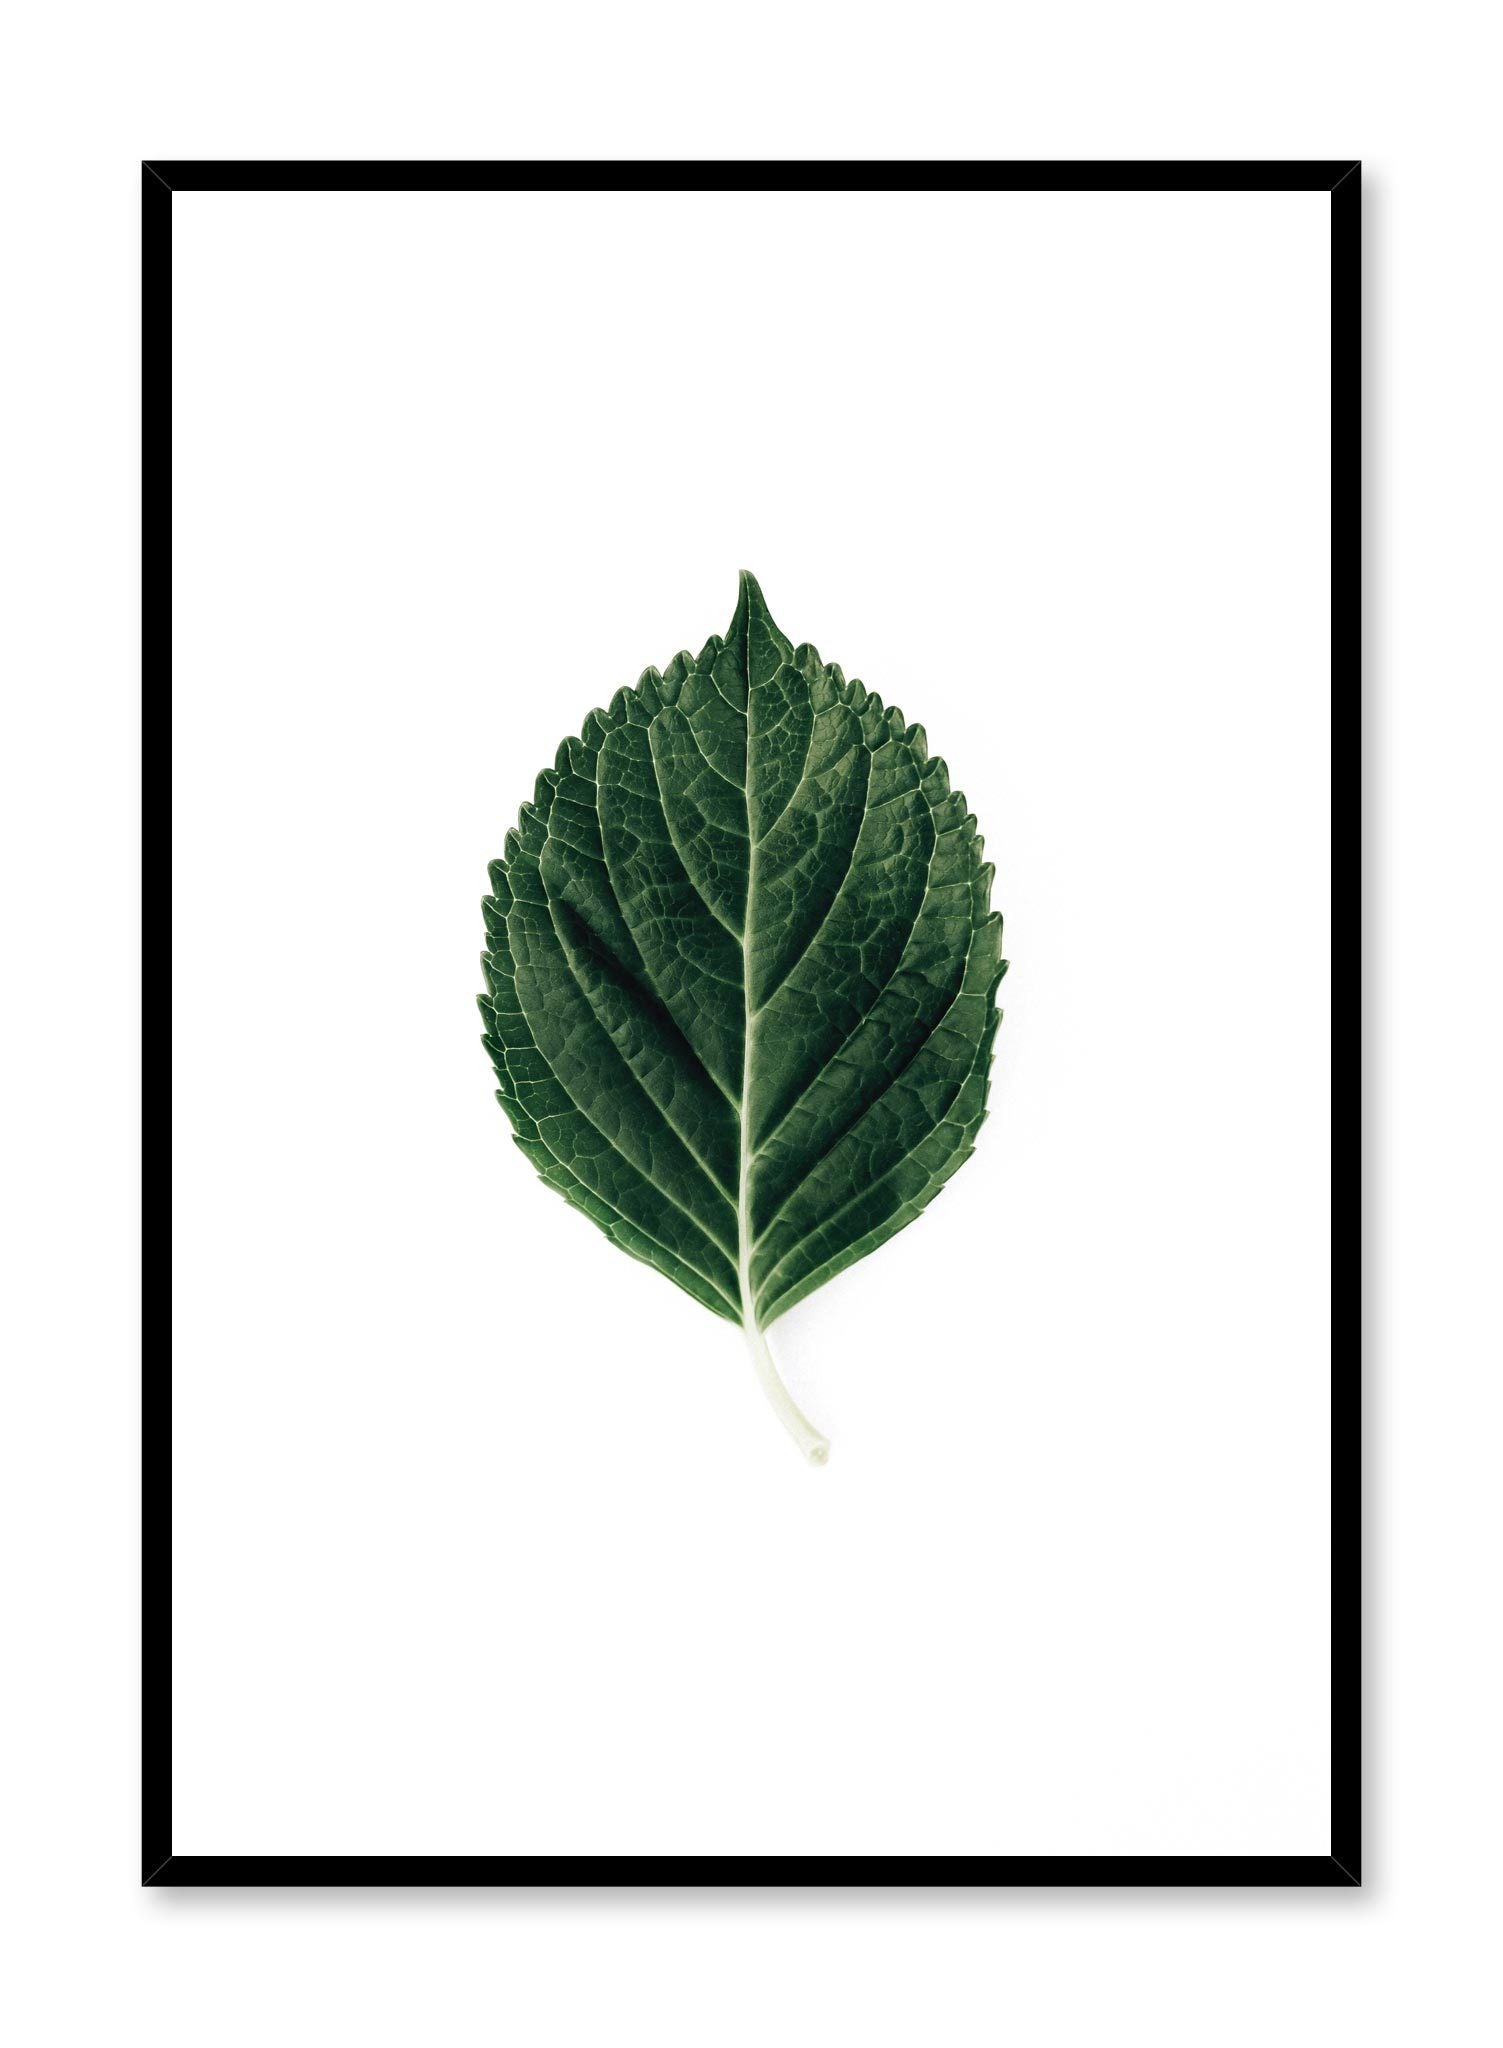 Minimalistic wall poster by Opposite Wall with lone leaf botanical photography